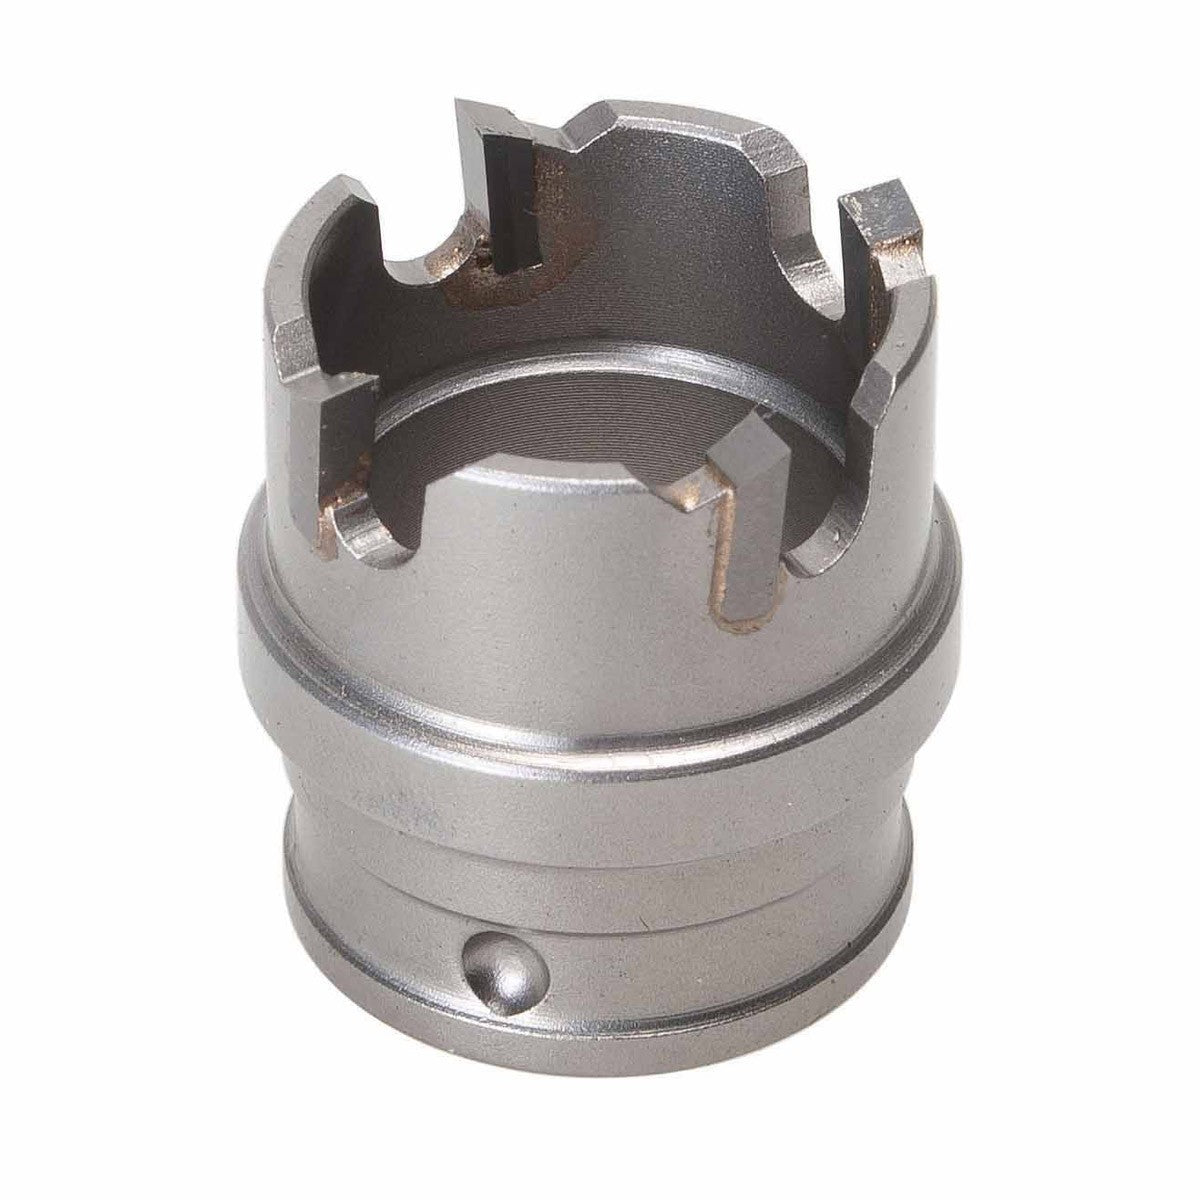 Greenlee 645-1 1" Quick Change Stainless Steel Carbide-Tipped Hole Cutter